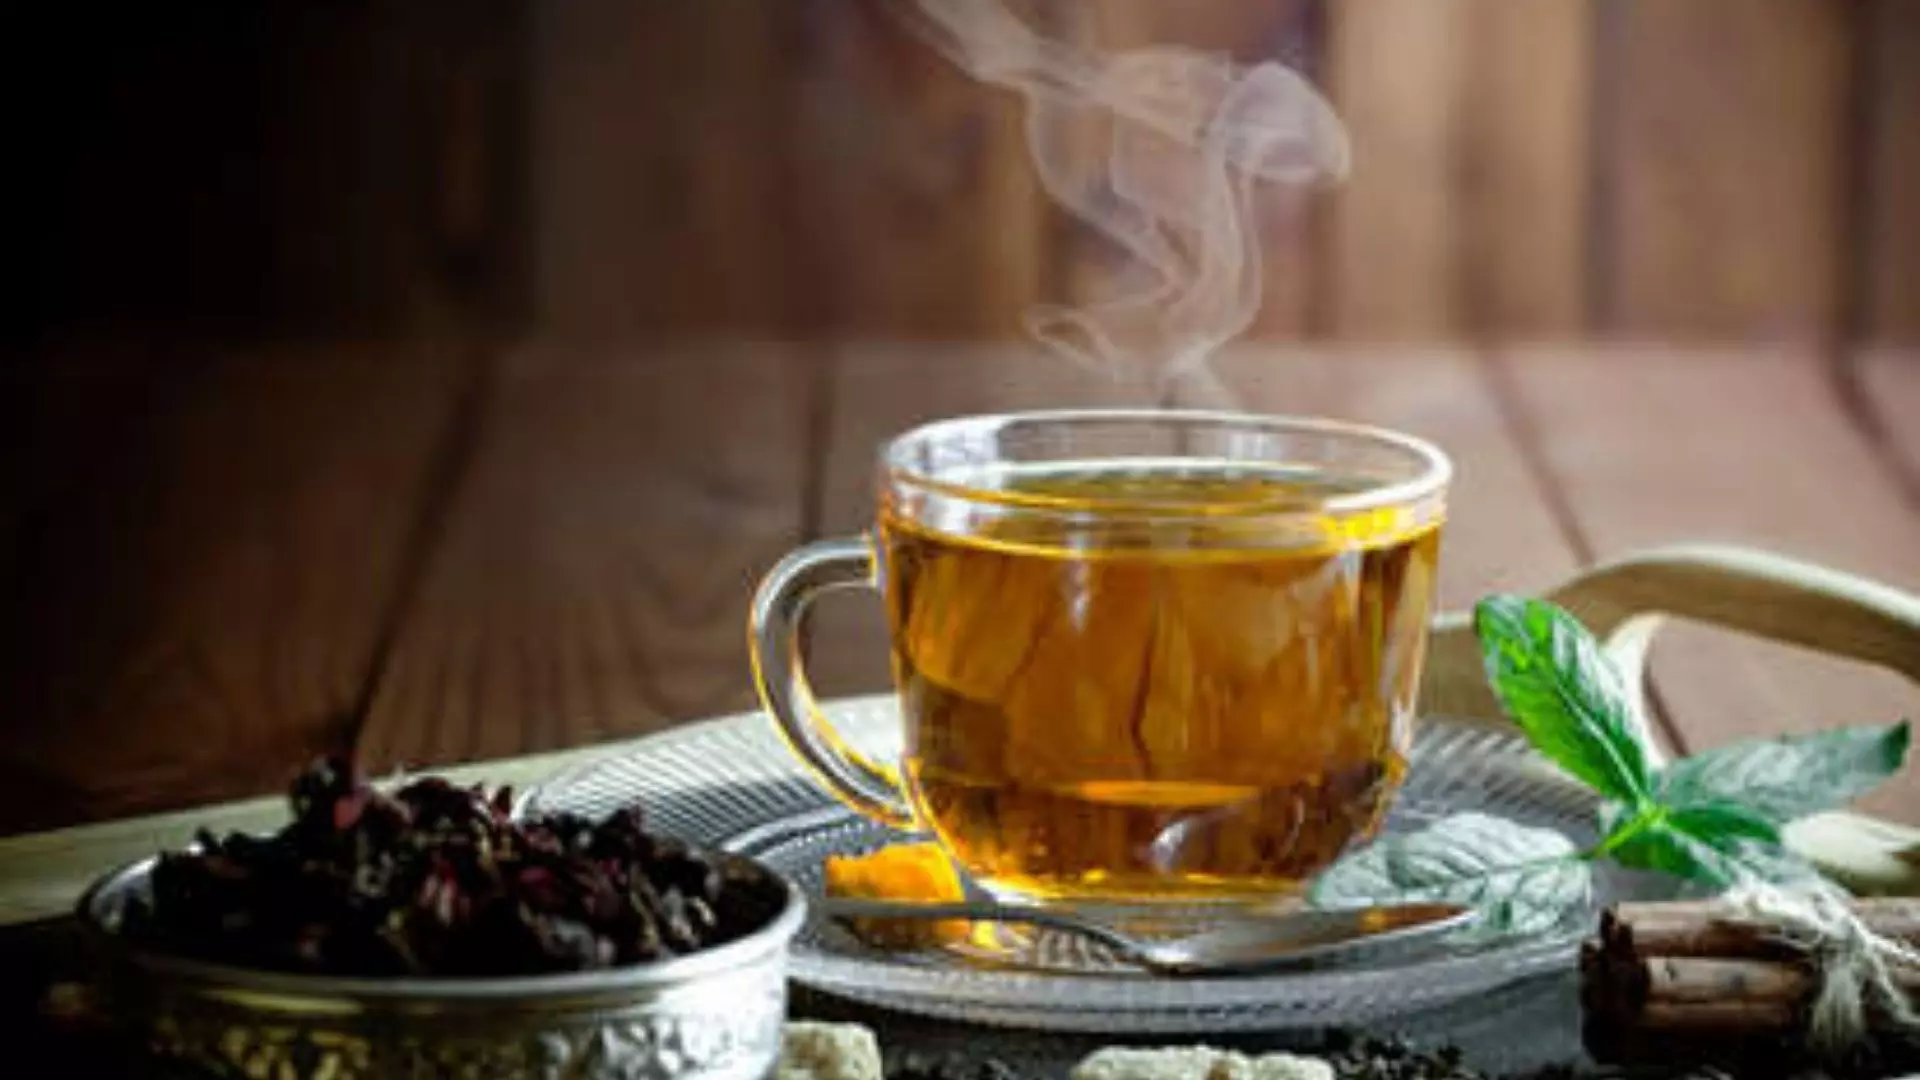 These Flavours tea can reduce your weight without any exercise know them and try them